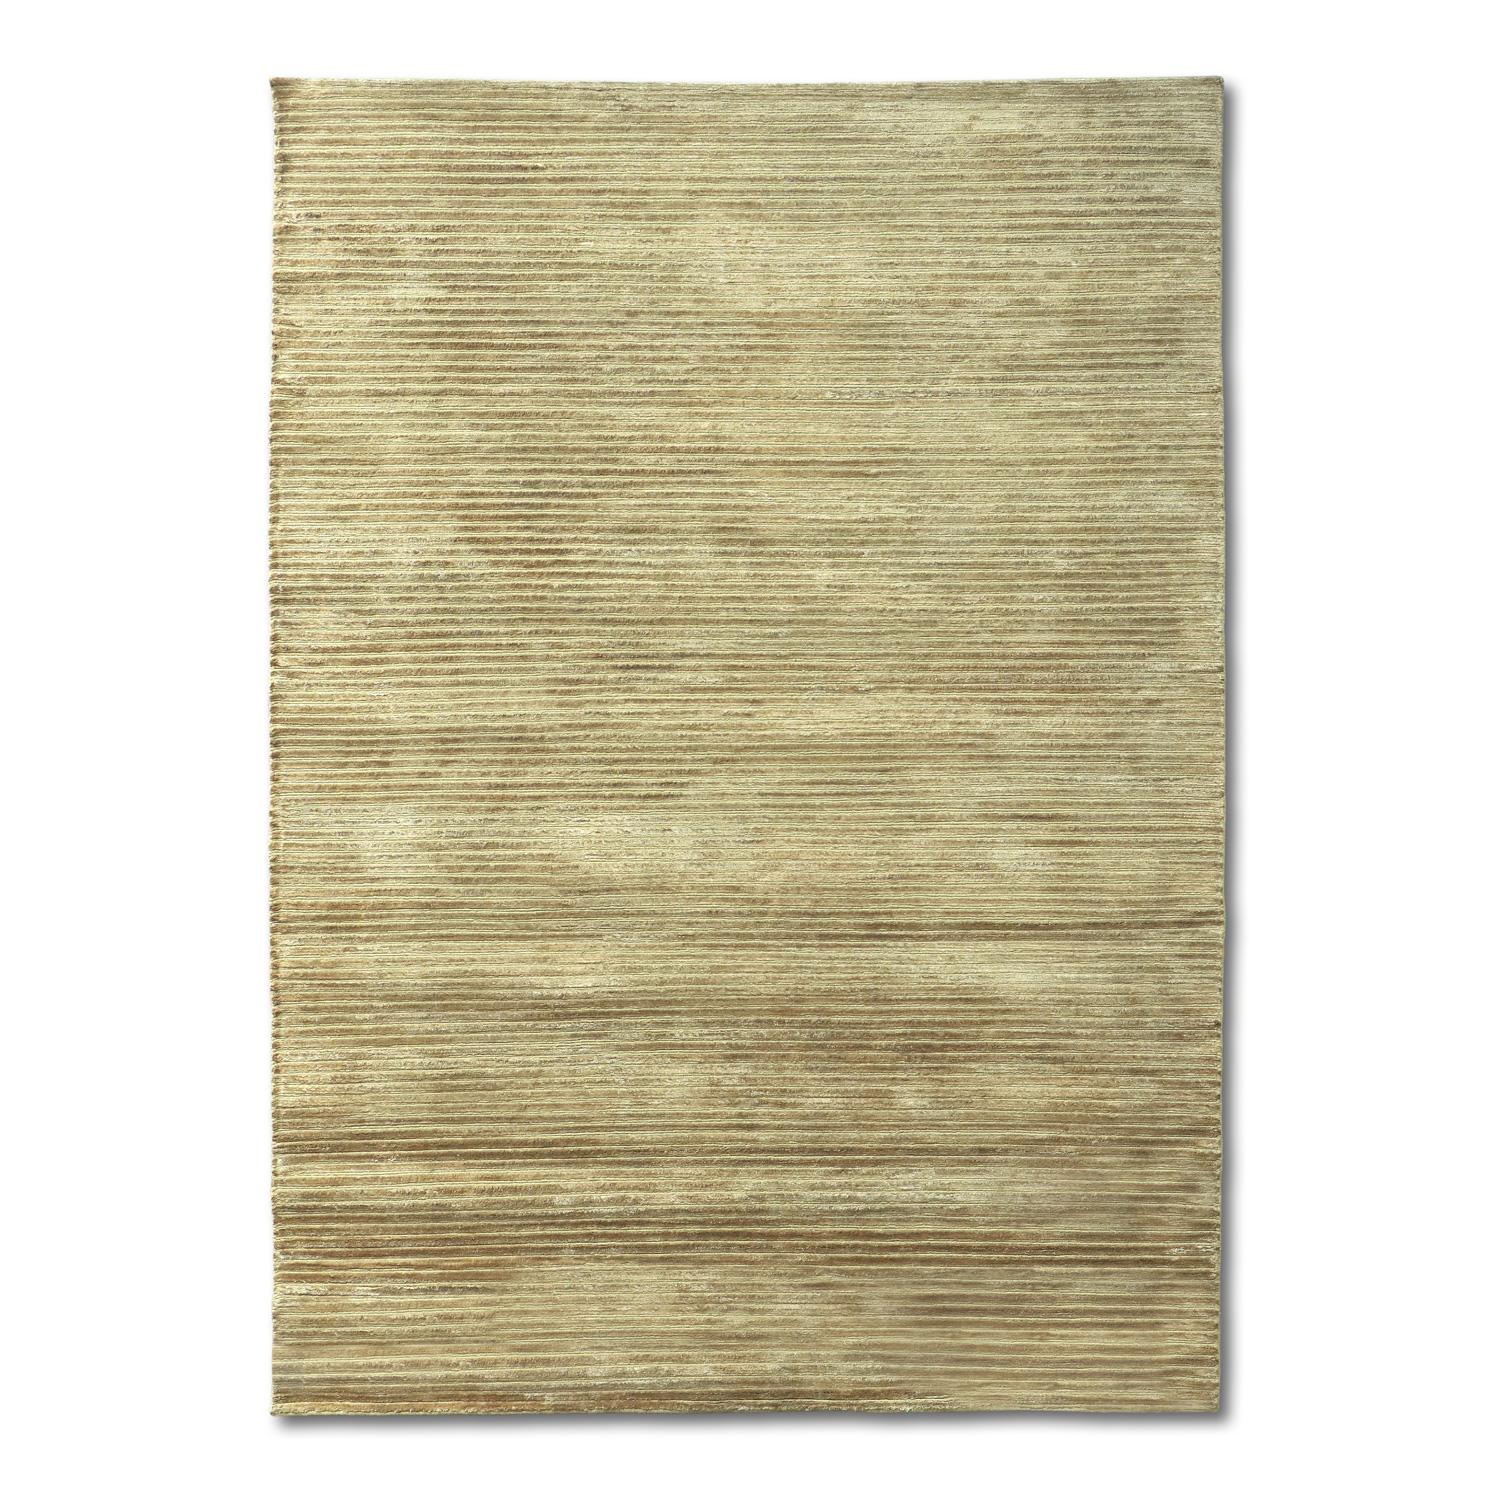 21st Cent Striped Gold Hues Nepal Wool Viscose Rug In Stock 170x240cm For Sale